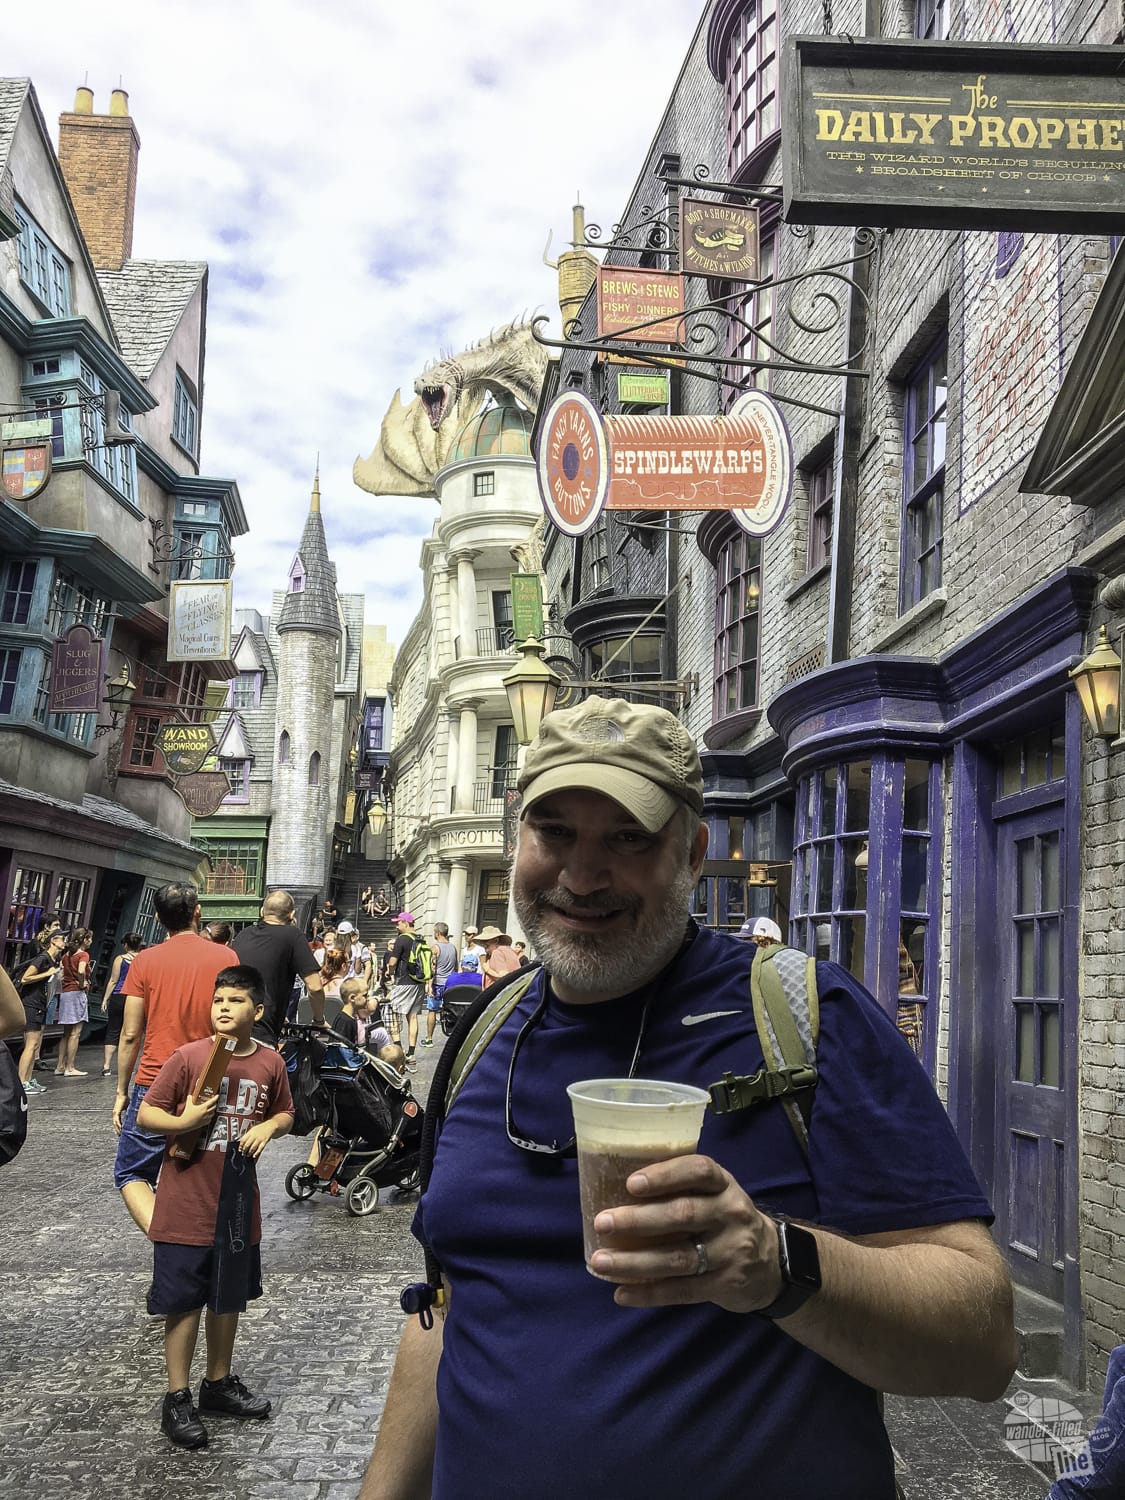 Grant trying a butterbeer in Diagon Alley.